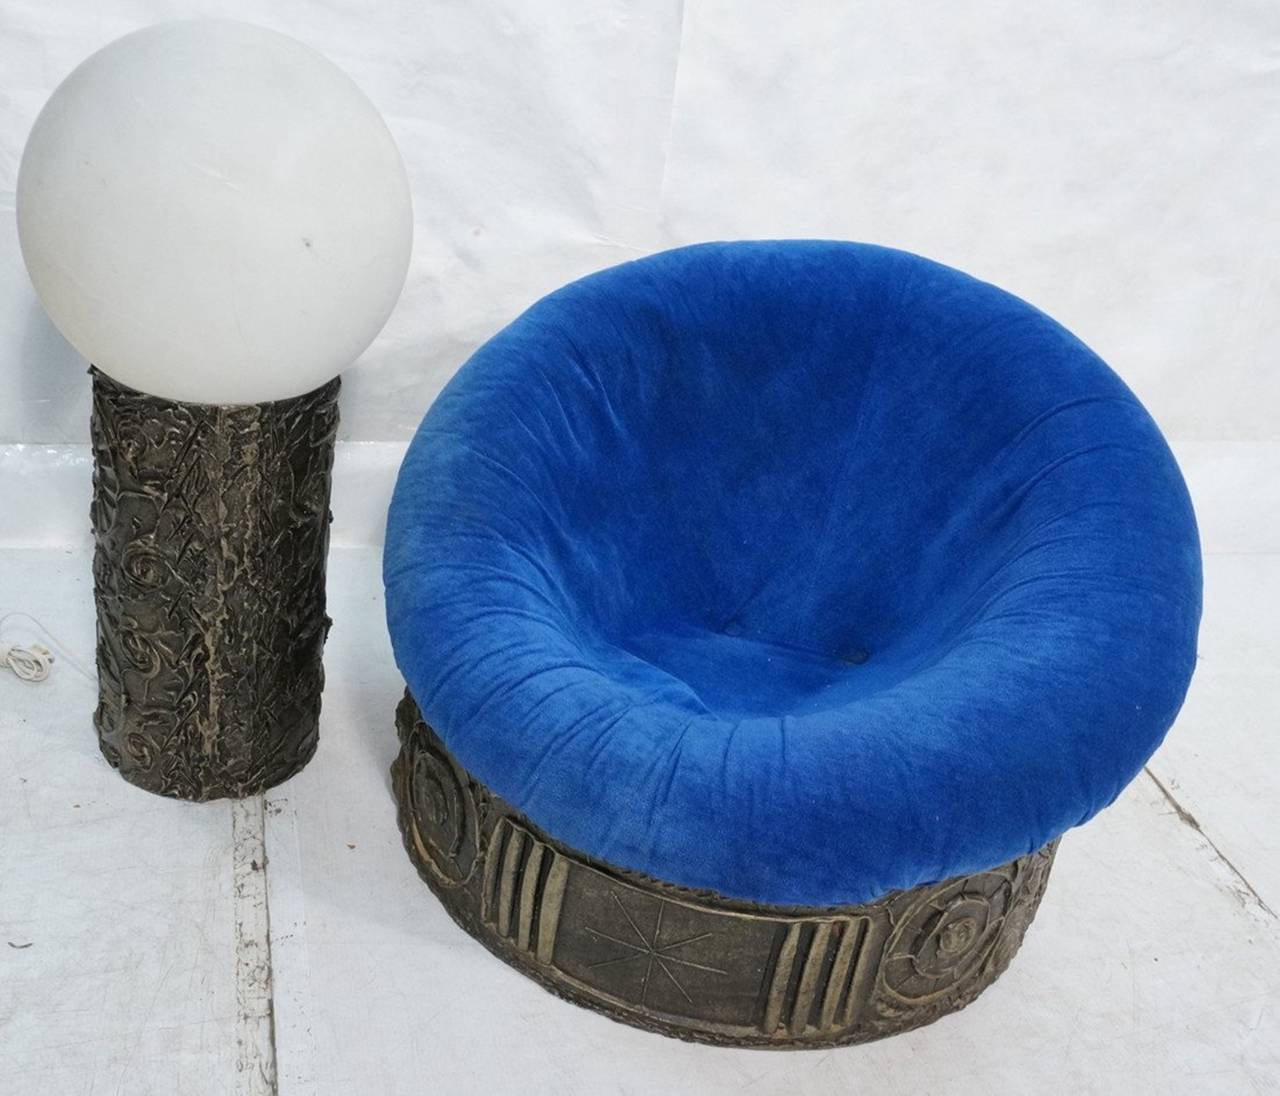 Beautiful lounge chair in the Brutalist style by Adrian Pearsall for Craft Associates.
The chair has a beautiful sculpted based made out of resin over wood, the cushion is upholstered in a blue velvet and is the original to the chair and must be